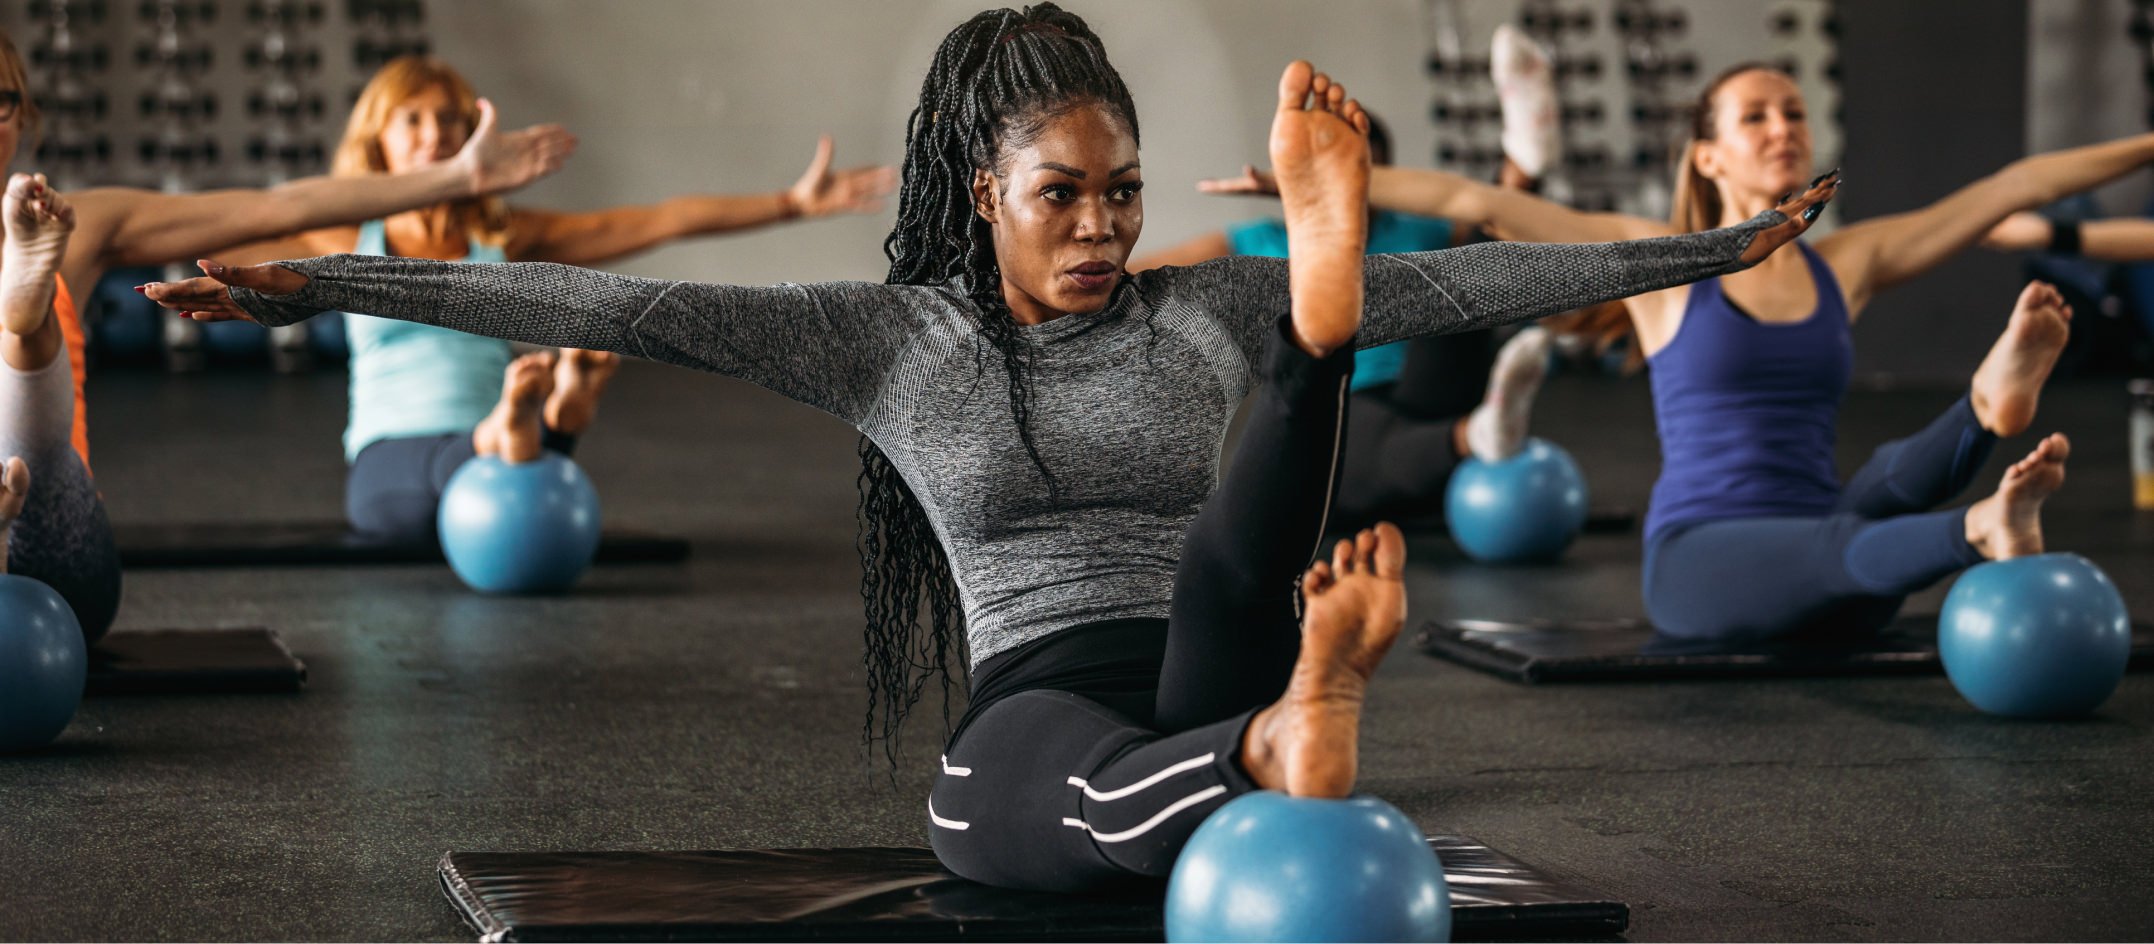 Exploring different types of exercises or fitness classes to stop fitness  BURNOUT!